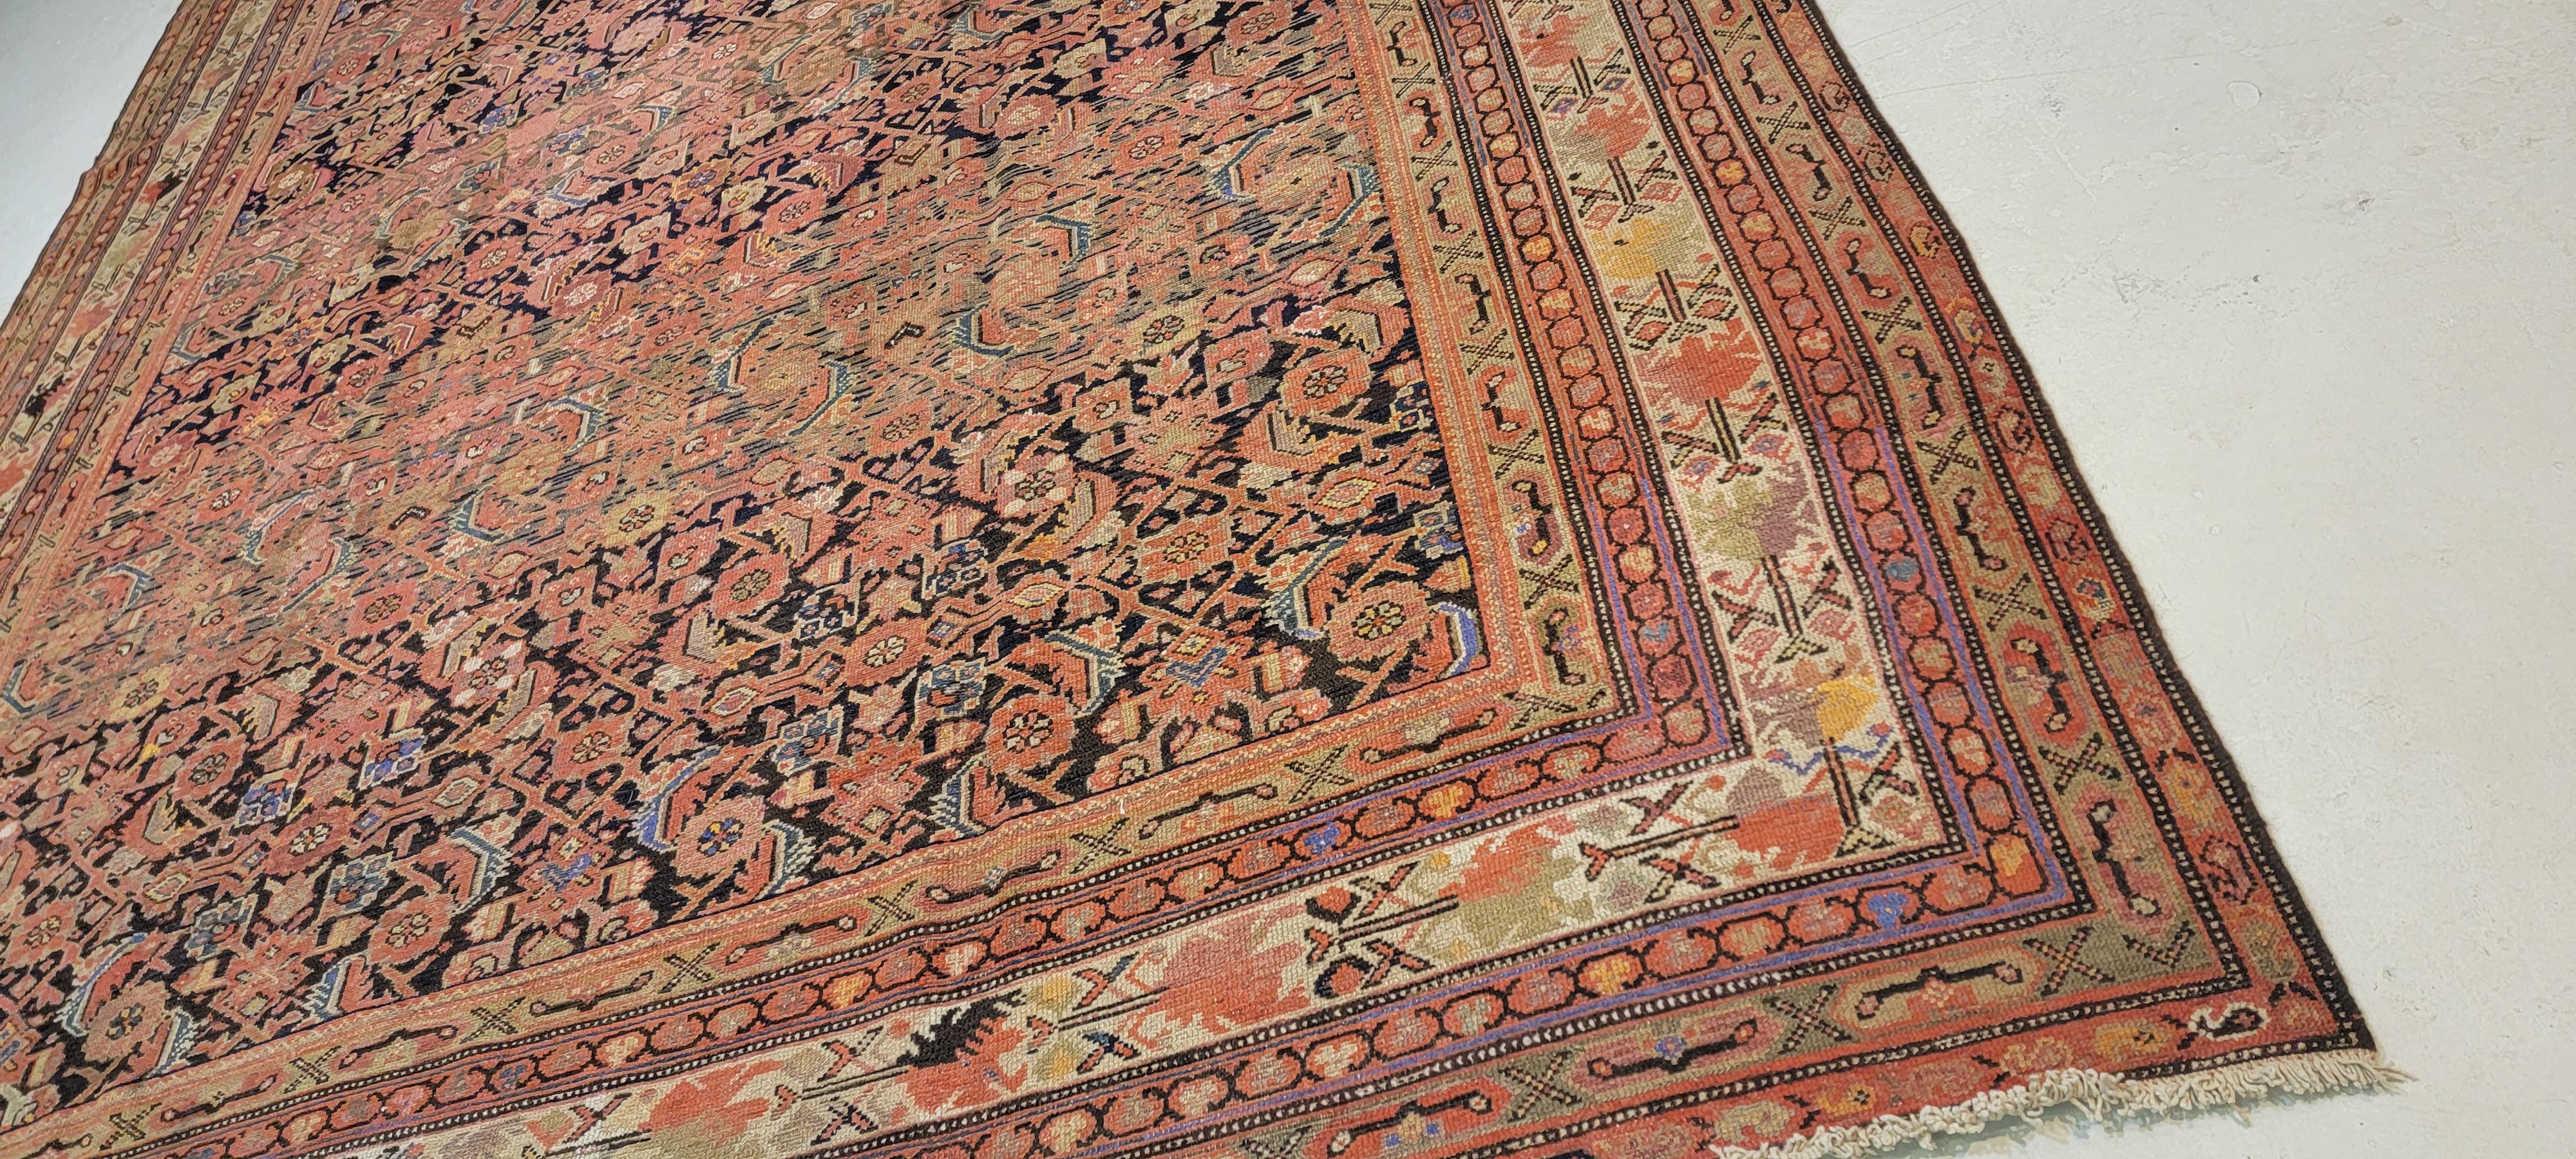 Early 20th Century Antique Persian/Kurdish Malayer Rug In Good Condition For Sale In Chamblee, GA